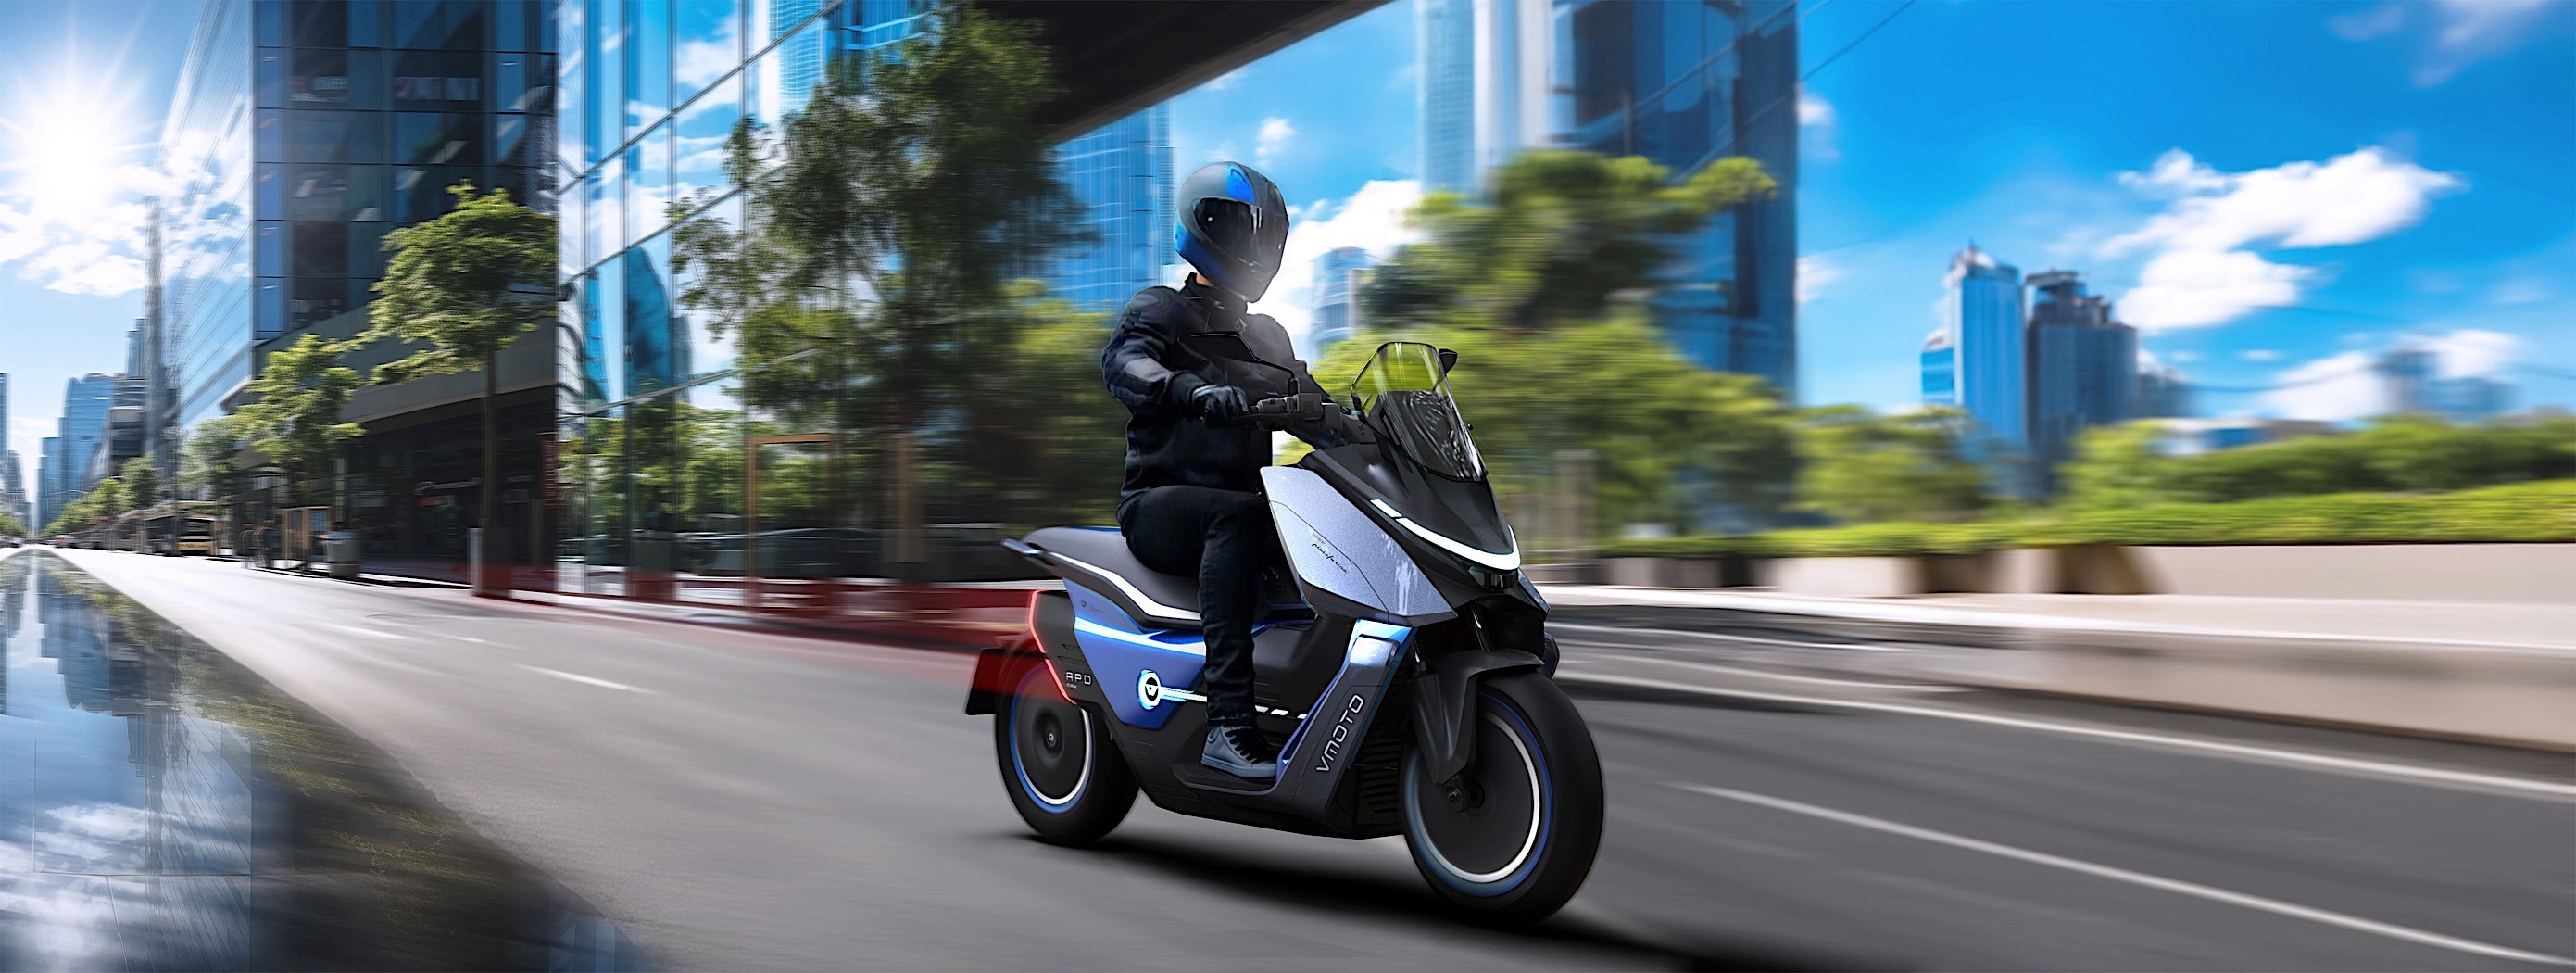 Vmoto APD Concept Is How All Scooters Should Look Like From Now On ...